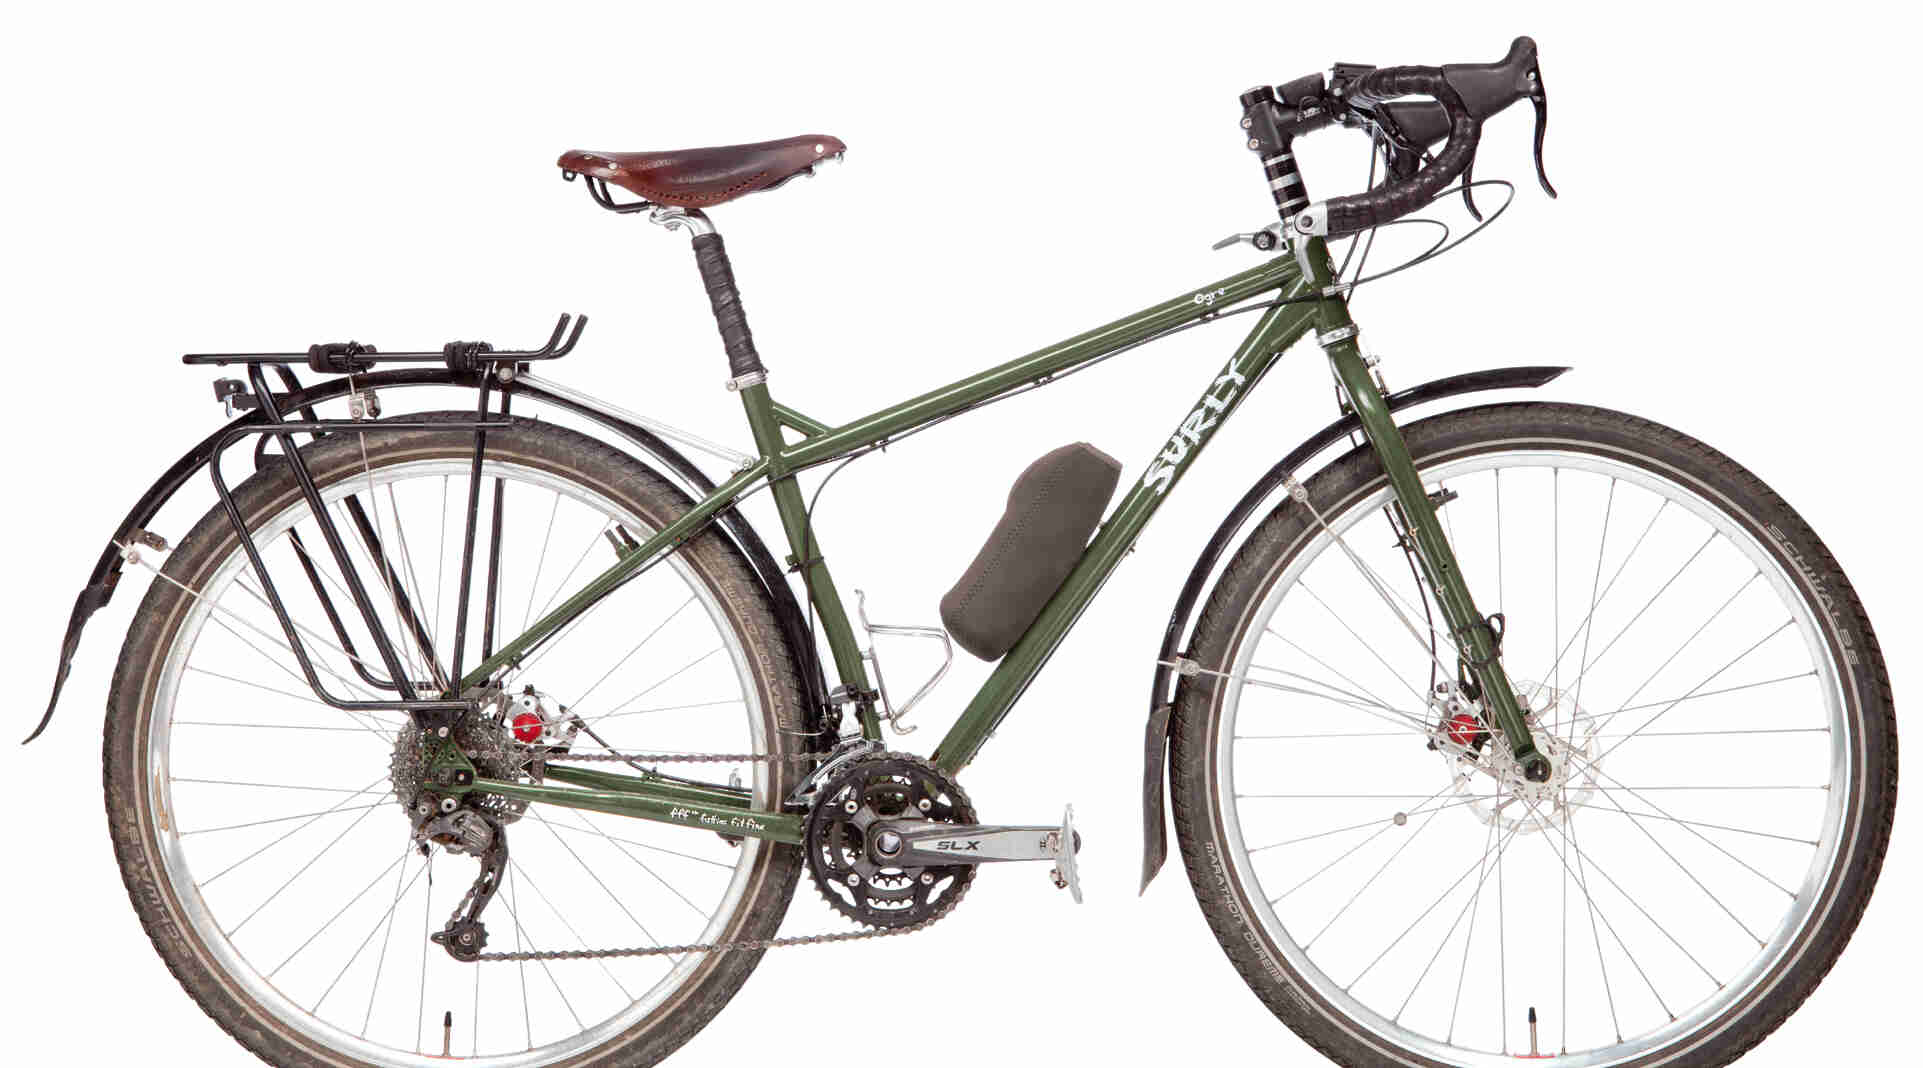 Surly Ogre Bike with fenders and rear rack - green - right side view with white background